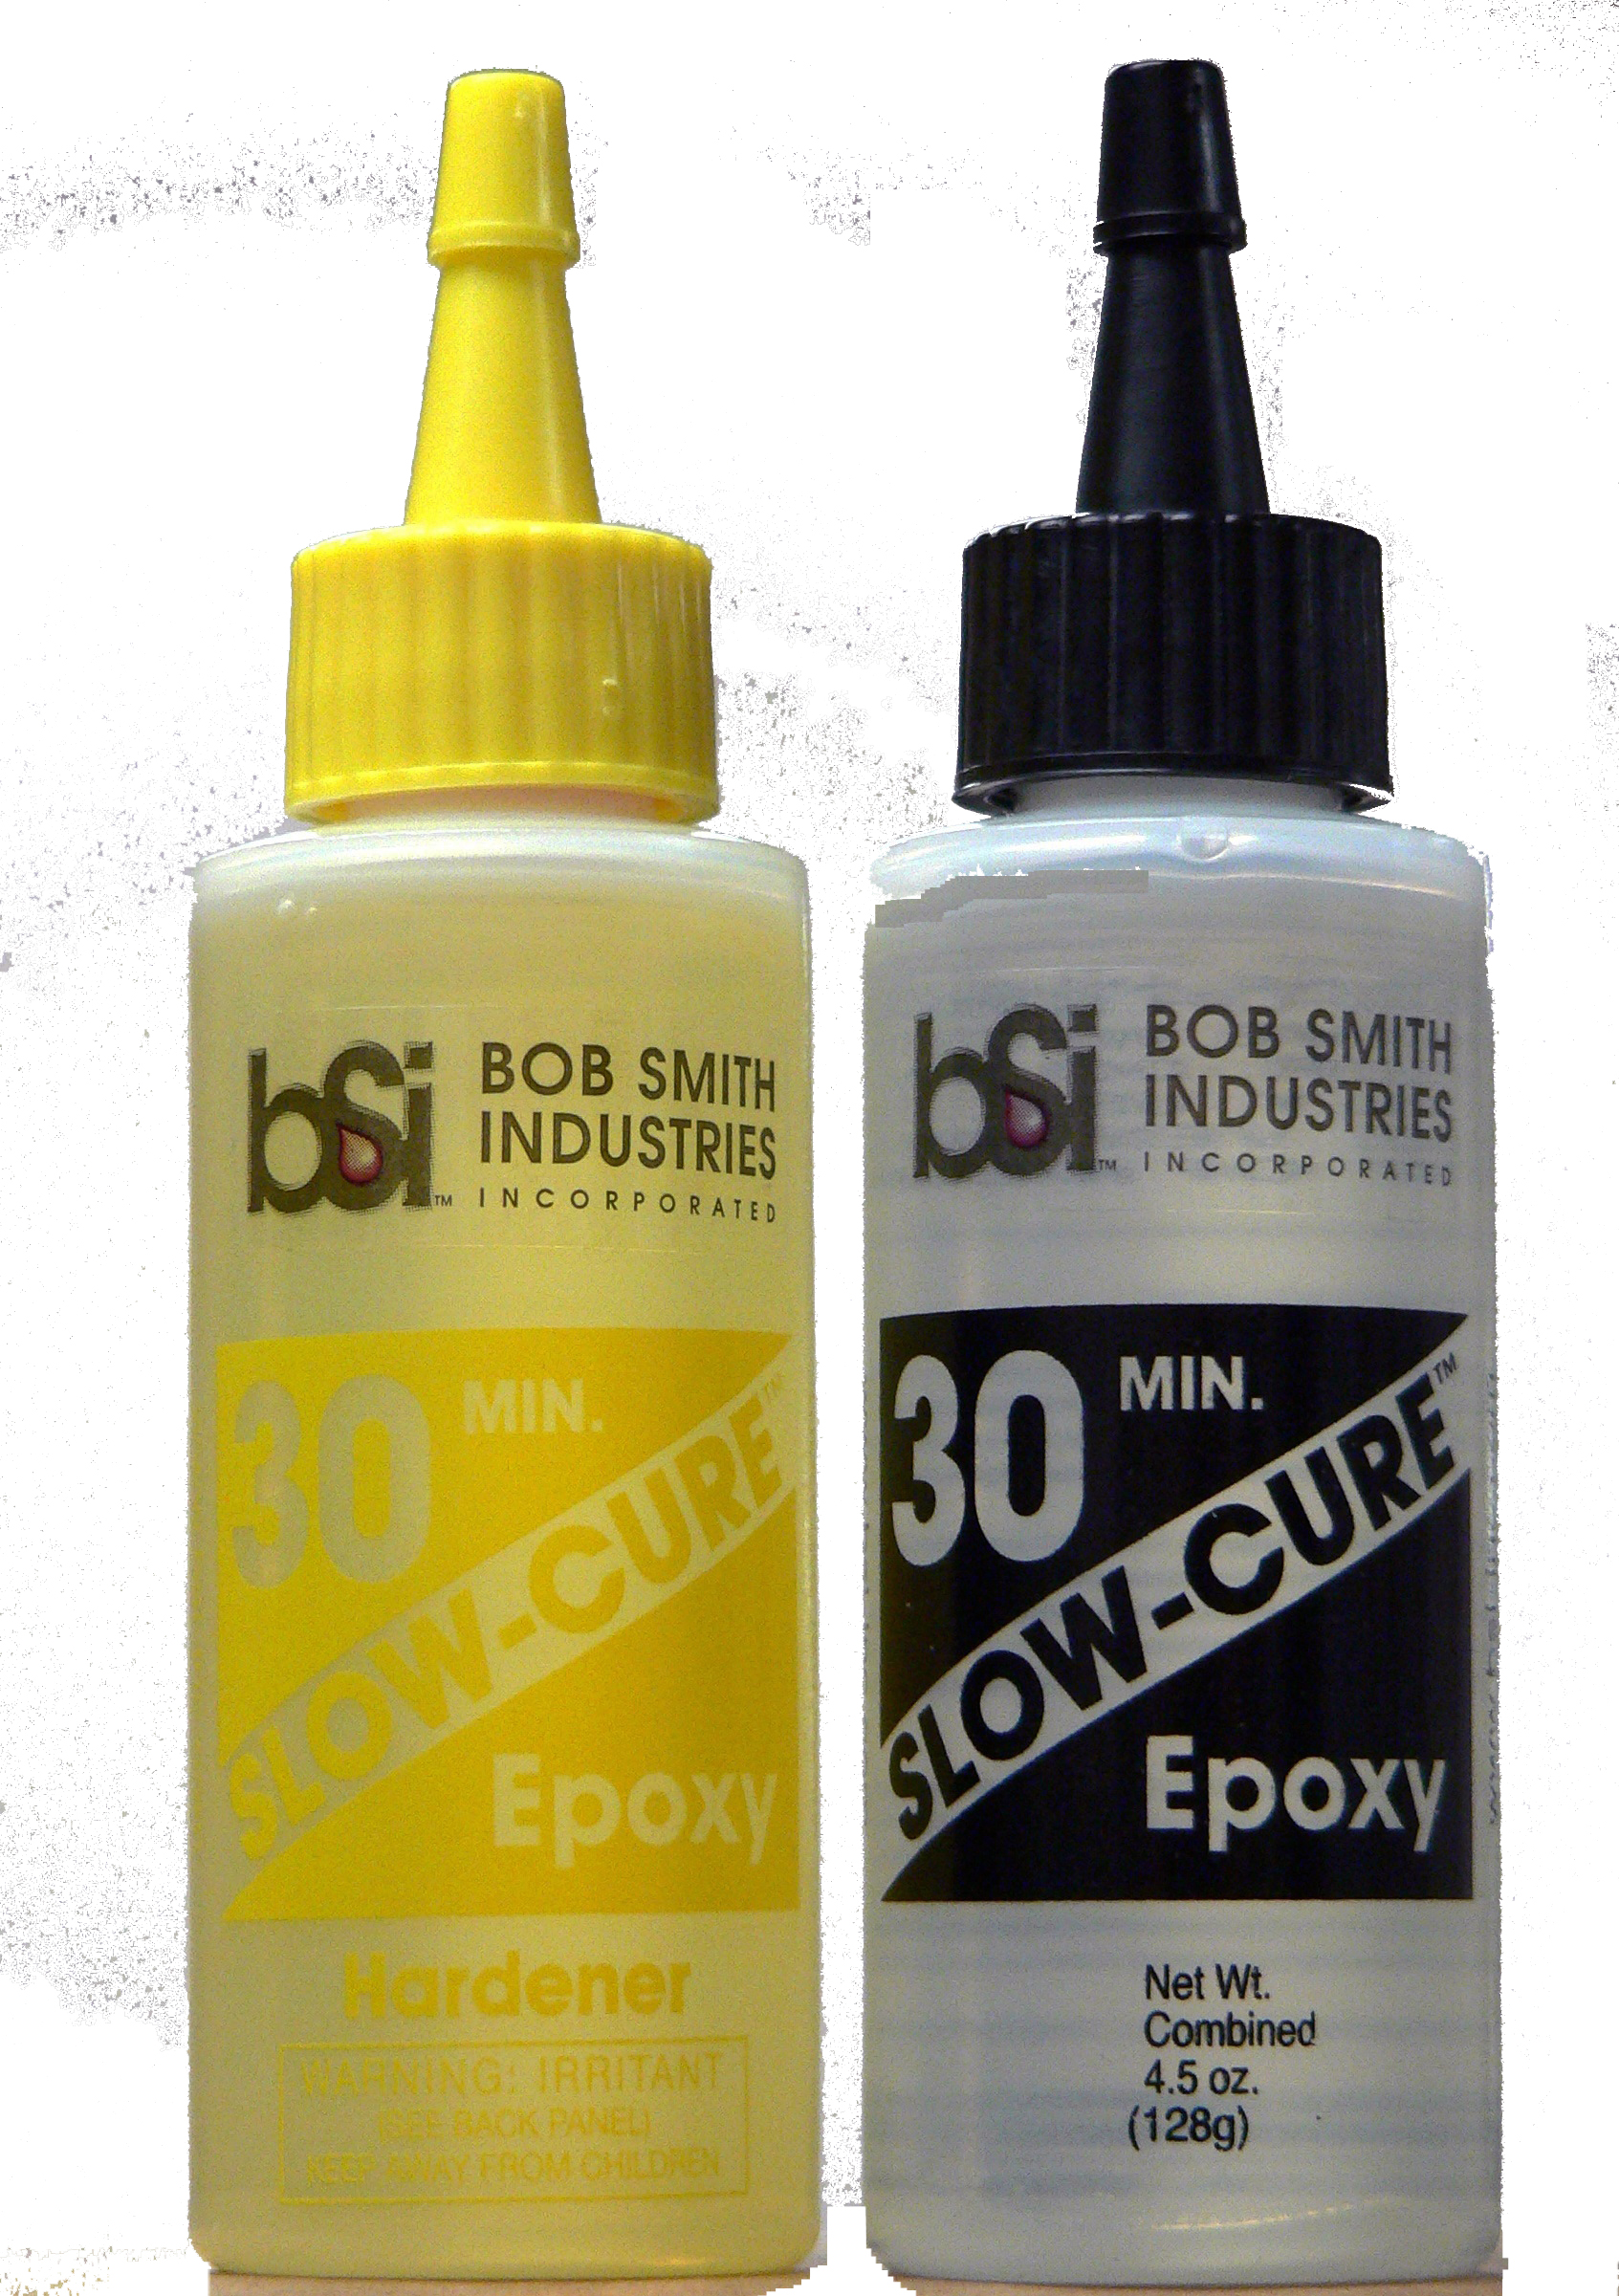 BSI slow cure, 30 minute epoxy 4.55oz - Click Image to Close